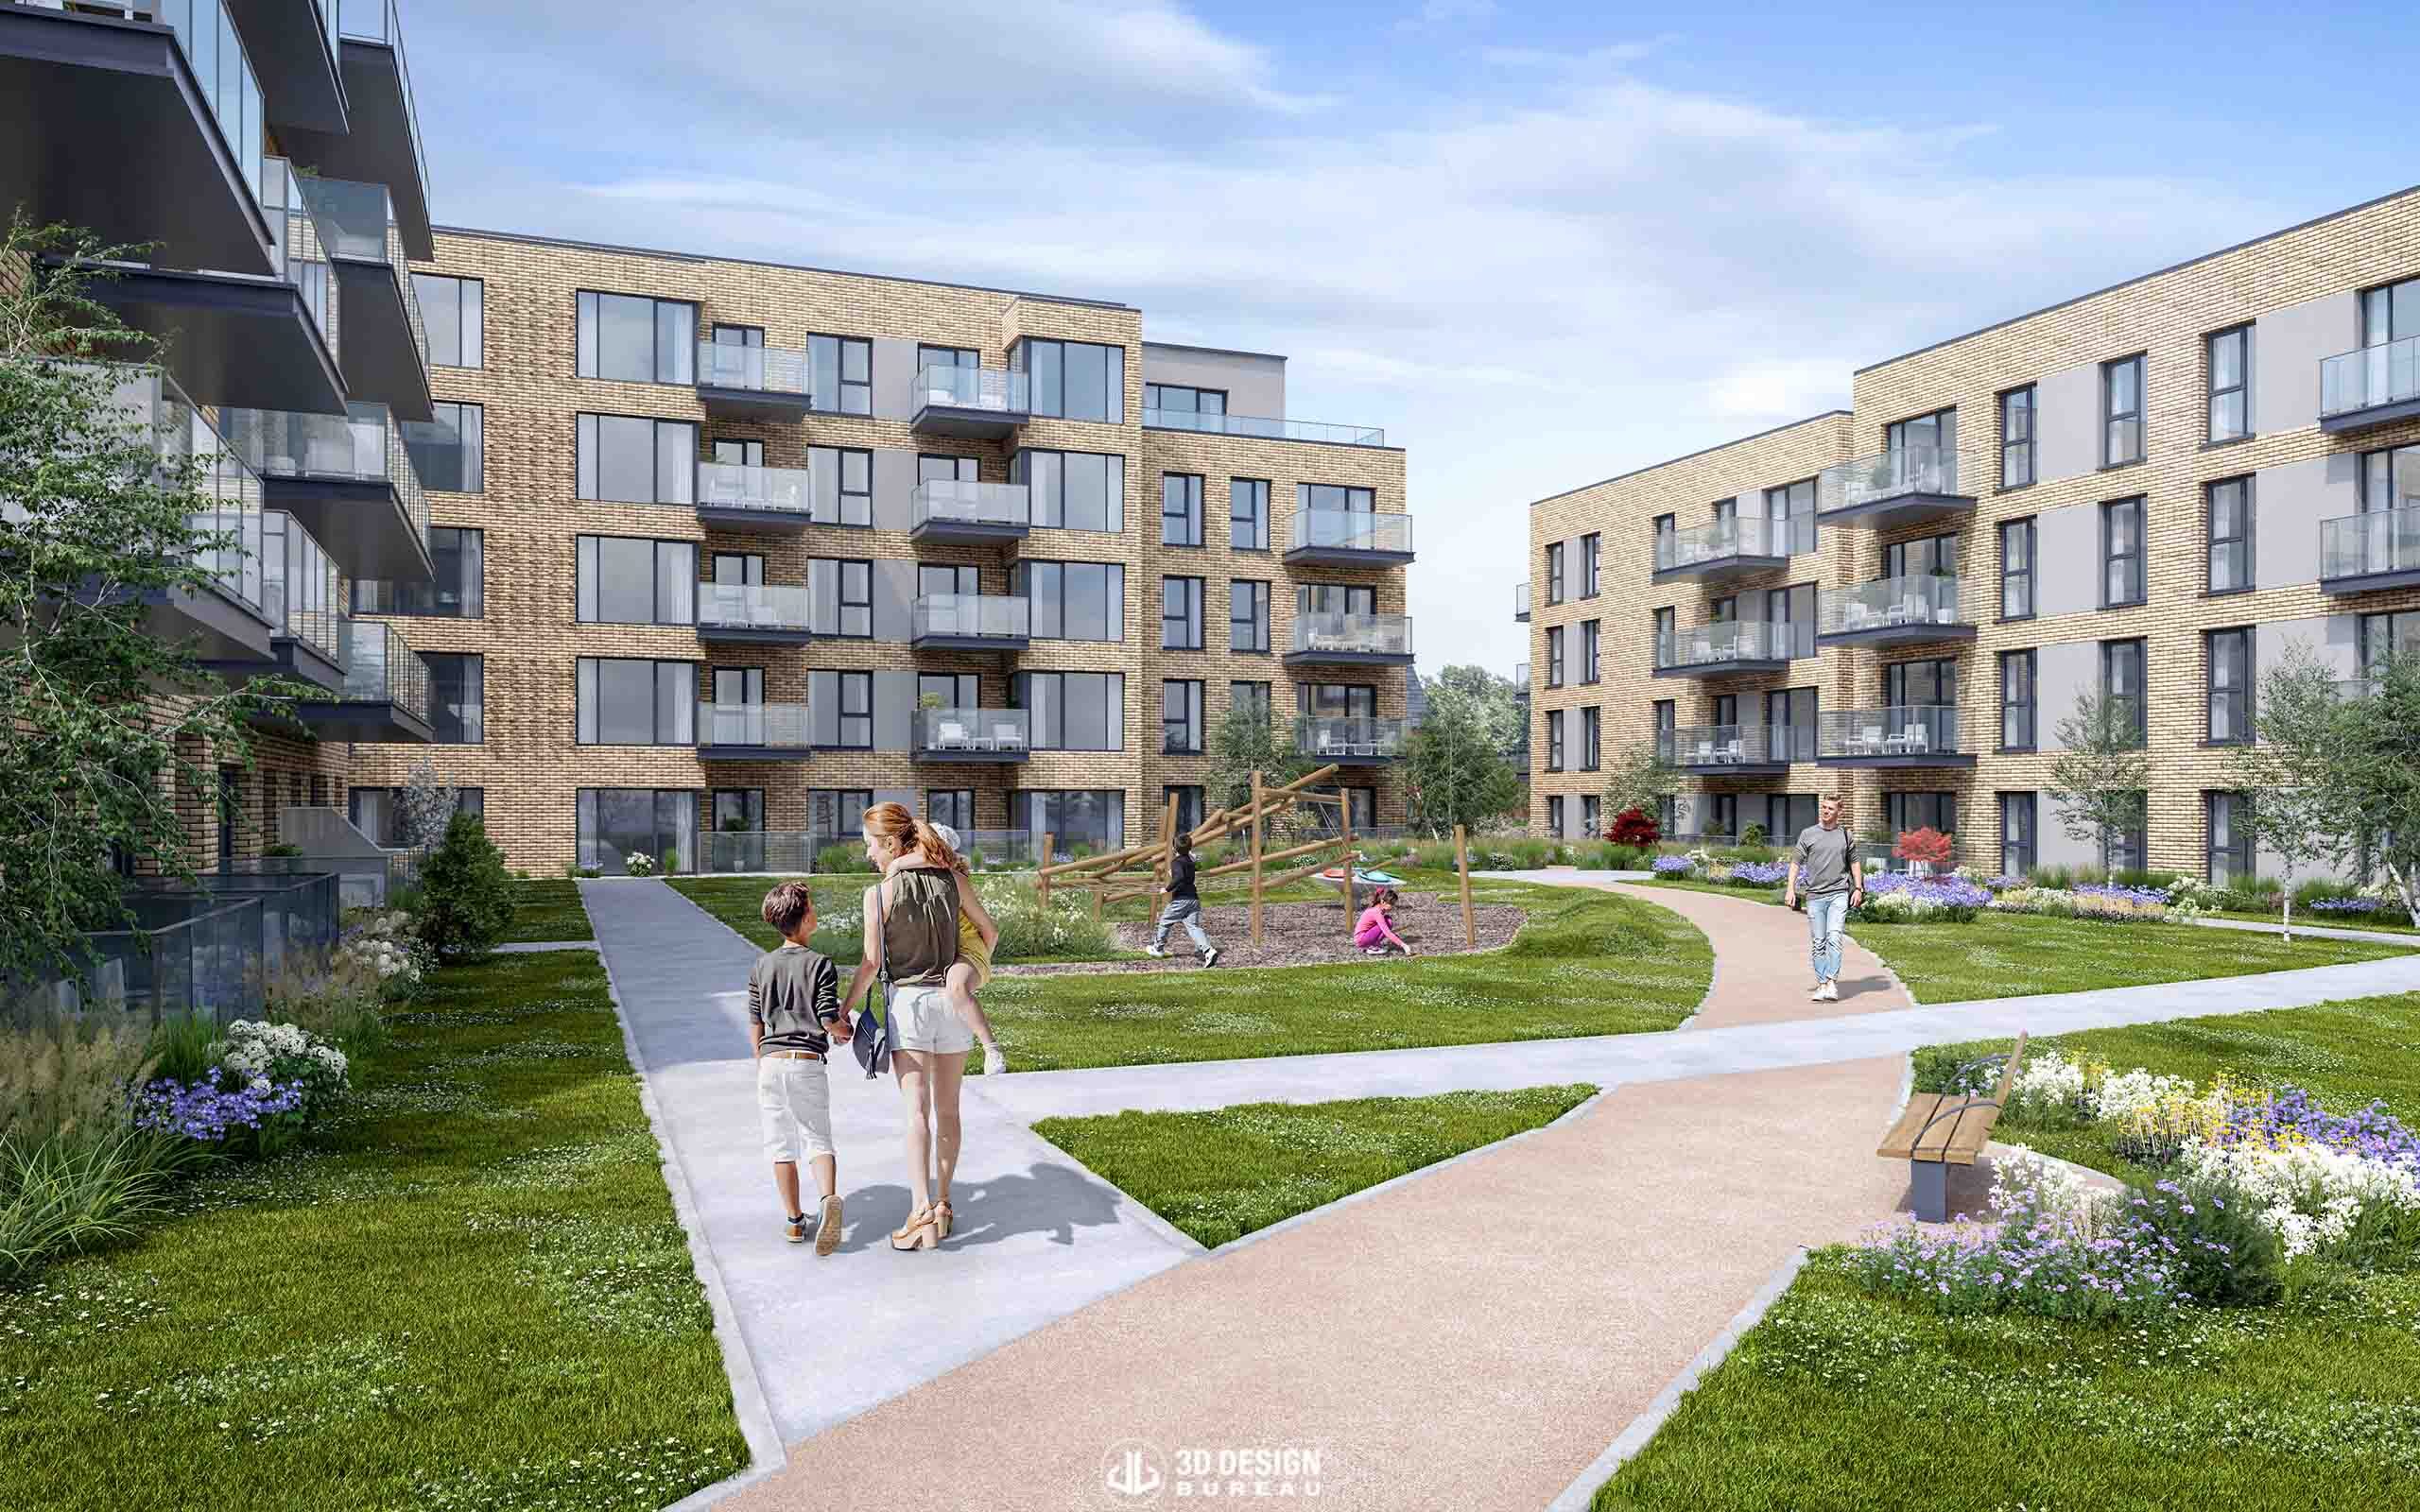 Architectural CGI of the proposed development in Hazelhatch_B